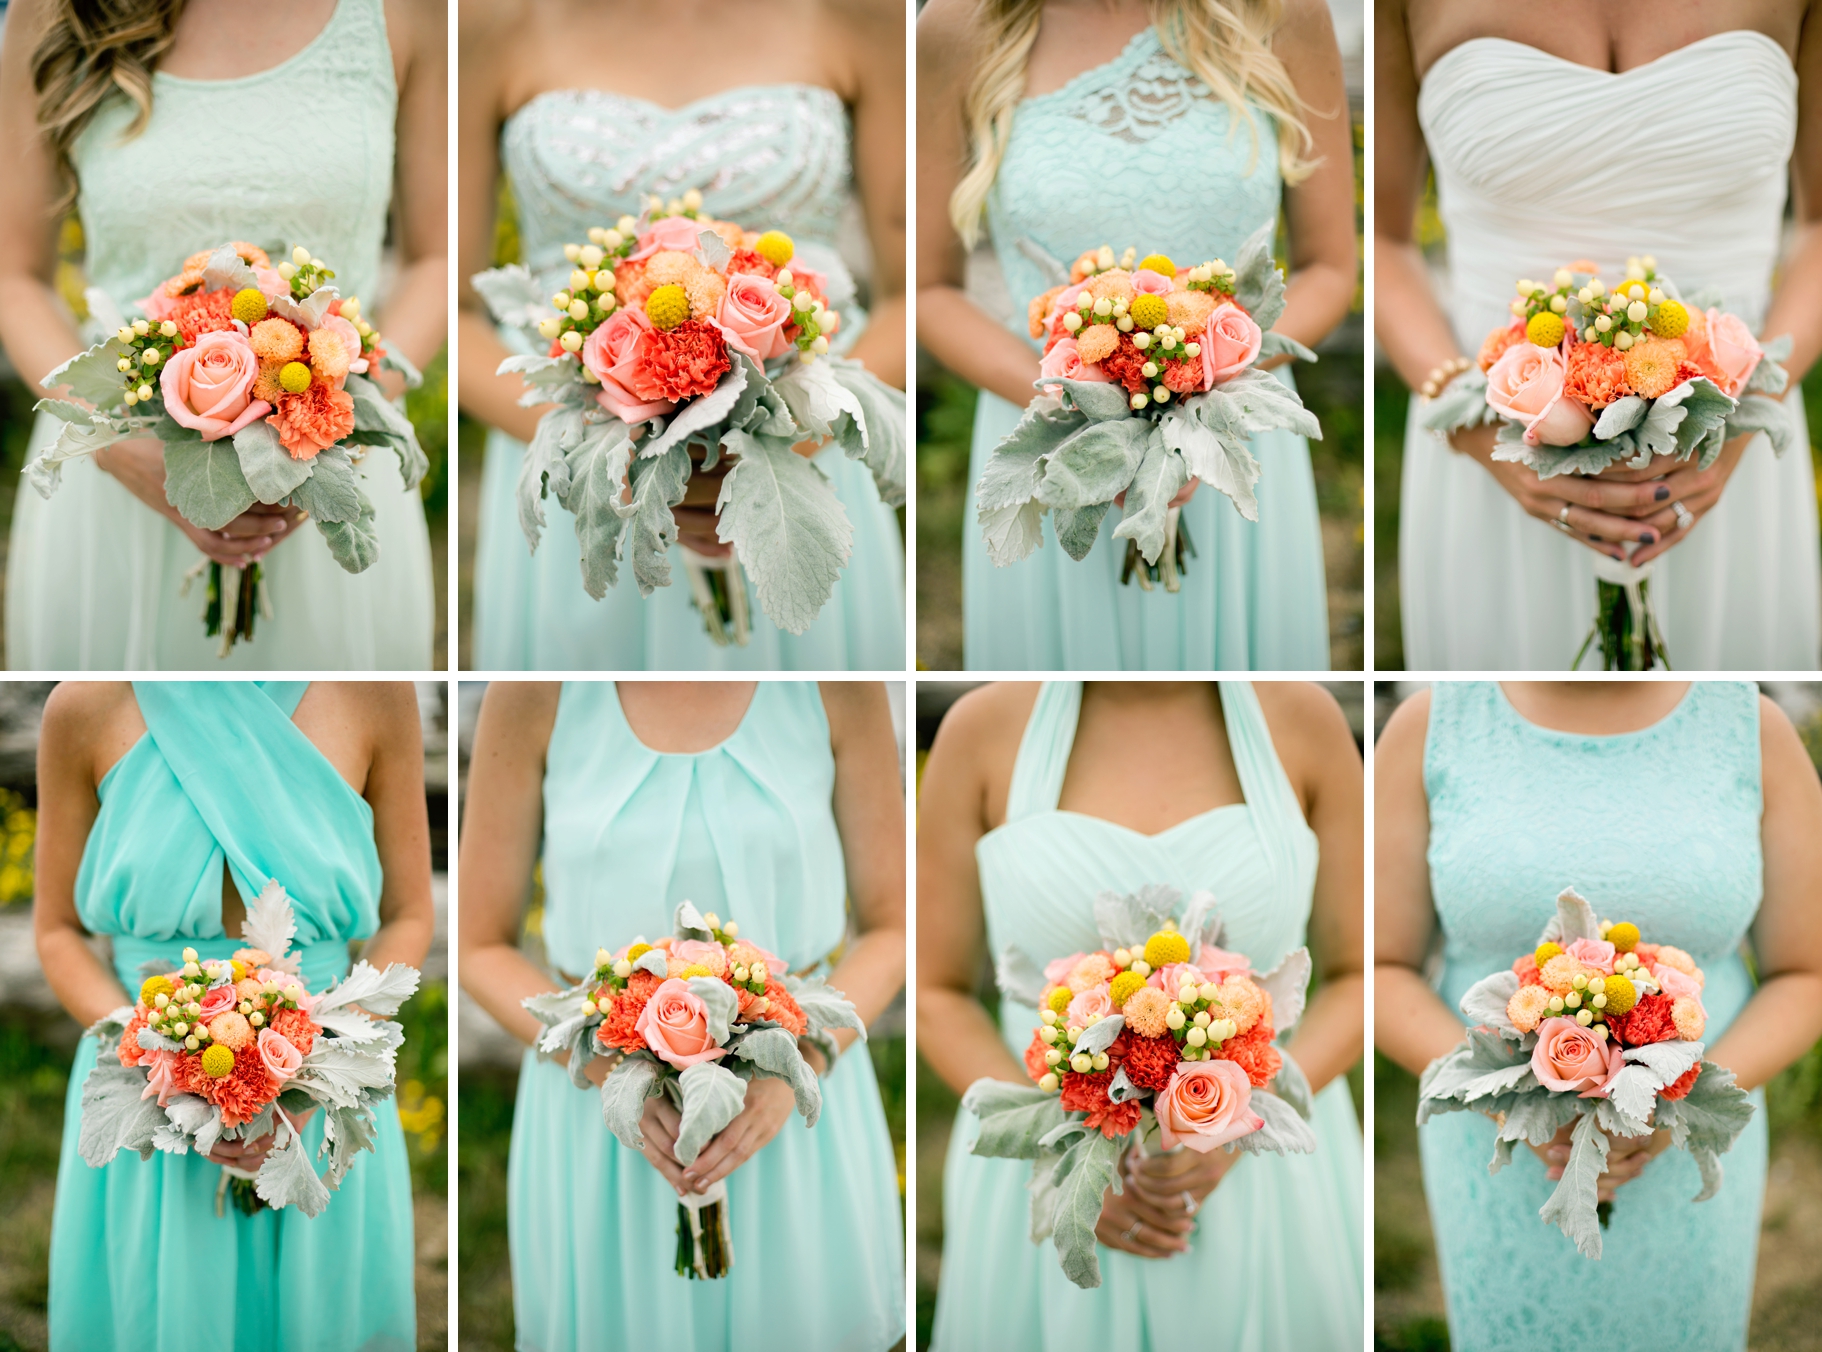 20-Aqua-Blue-Individual-Dresses-Bridesmaid-Bouquets-Colorful-Dusty-Miller-Love-Blooms-Events-Florist-Waterfront-Pudget-Sound-Driftwood-Normandy-Cove-Beach-Wedding-Photographer-Bride-Groom-Seattle-Wedding-Photography-Northwest